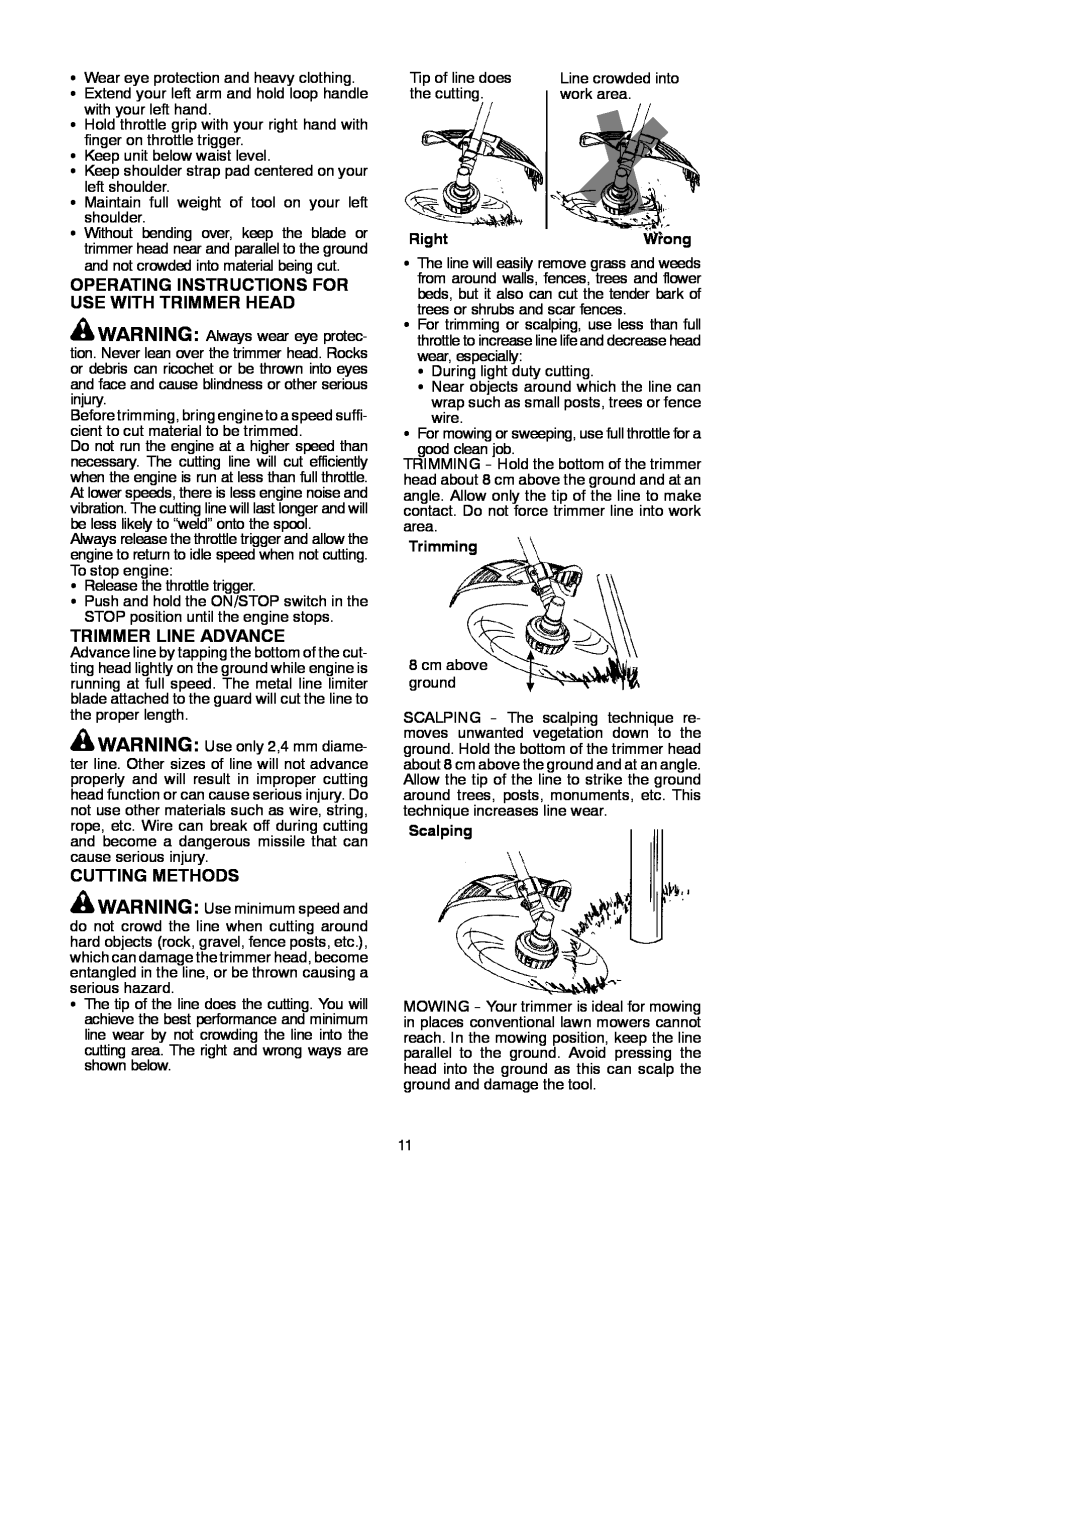 McCulloch 115306026 Operating Instructions For Use With Trimmer Head, Trimmer Line Advance, Cutting Methods, RightWrong 